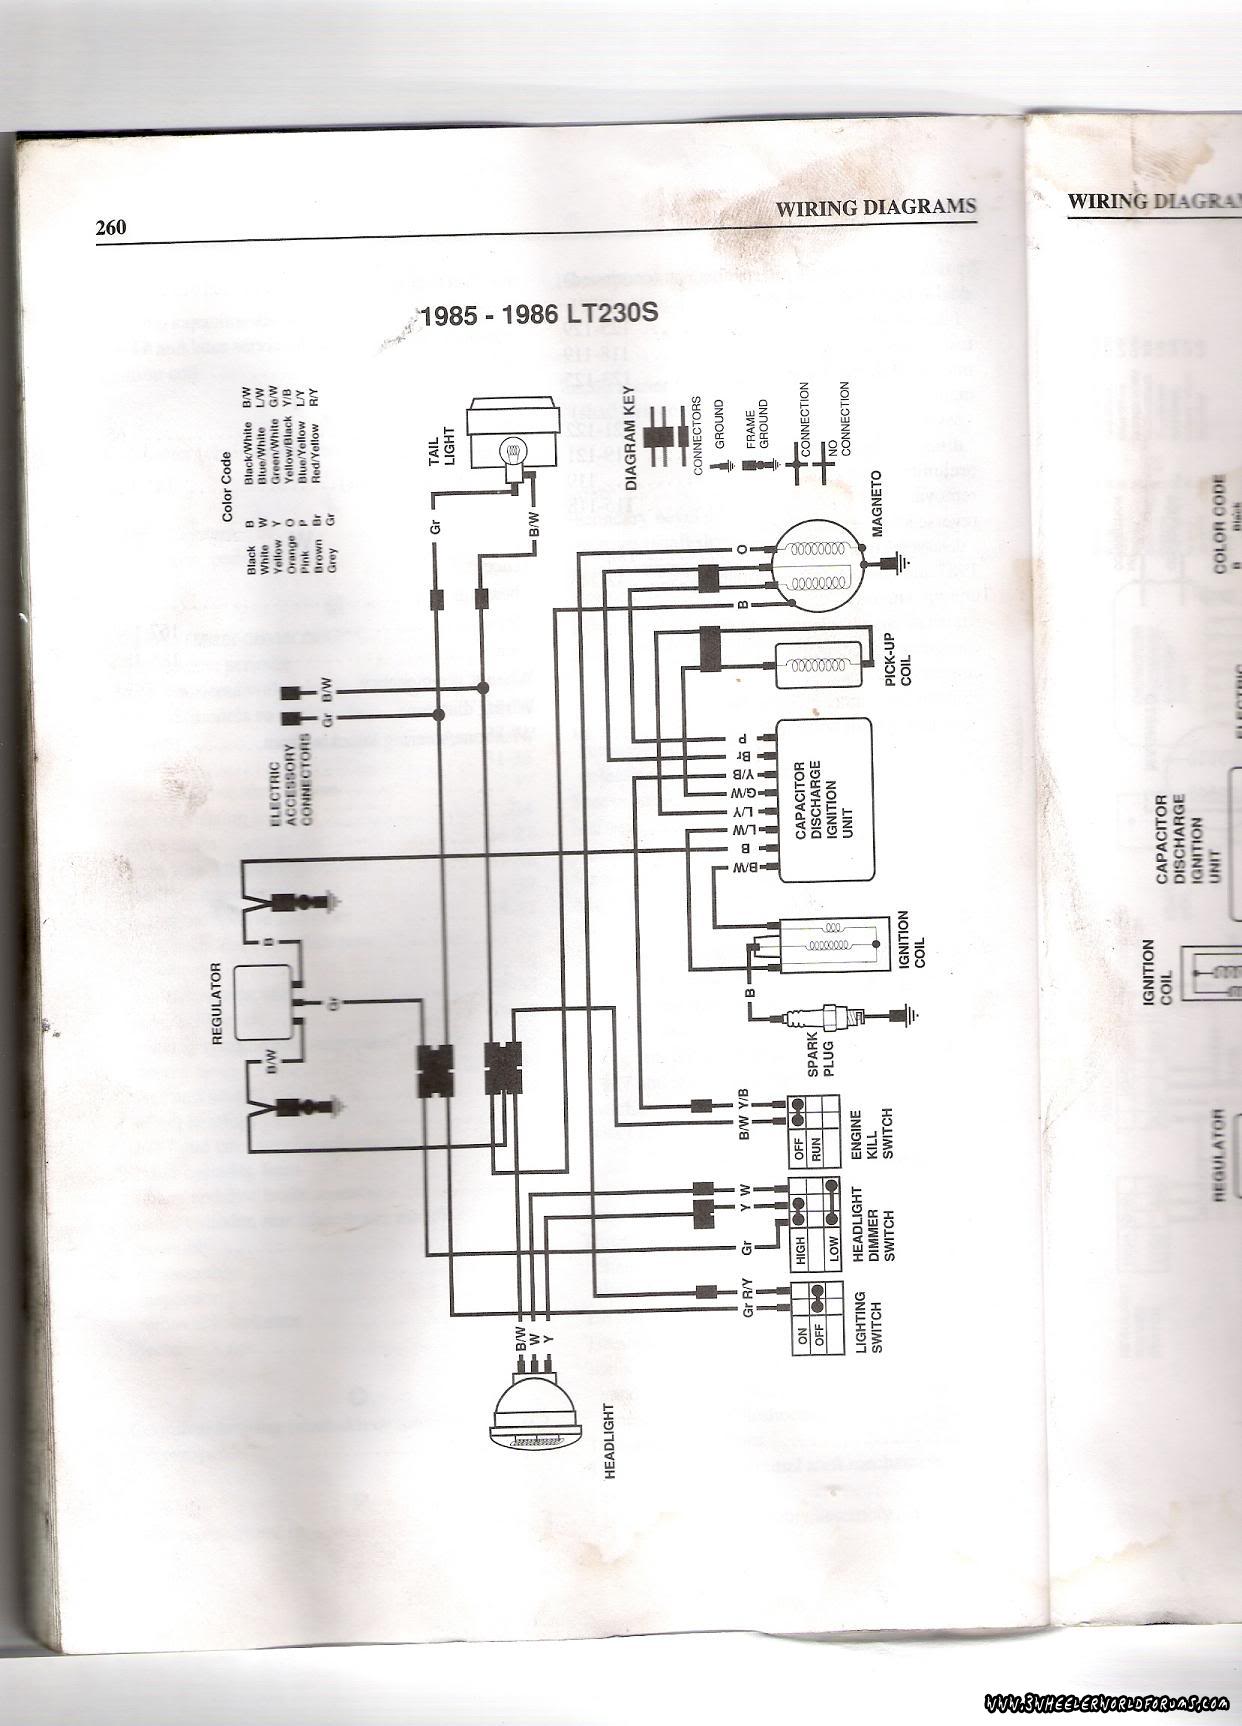 Suzuki Eiger 400 Wiring Diagram And Parts List from atvconnection.com